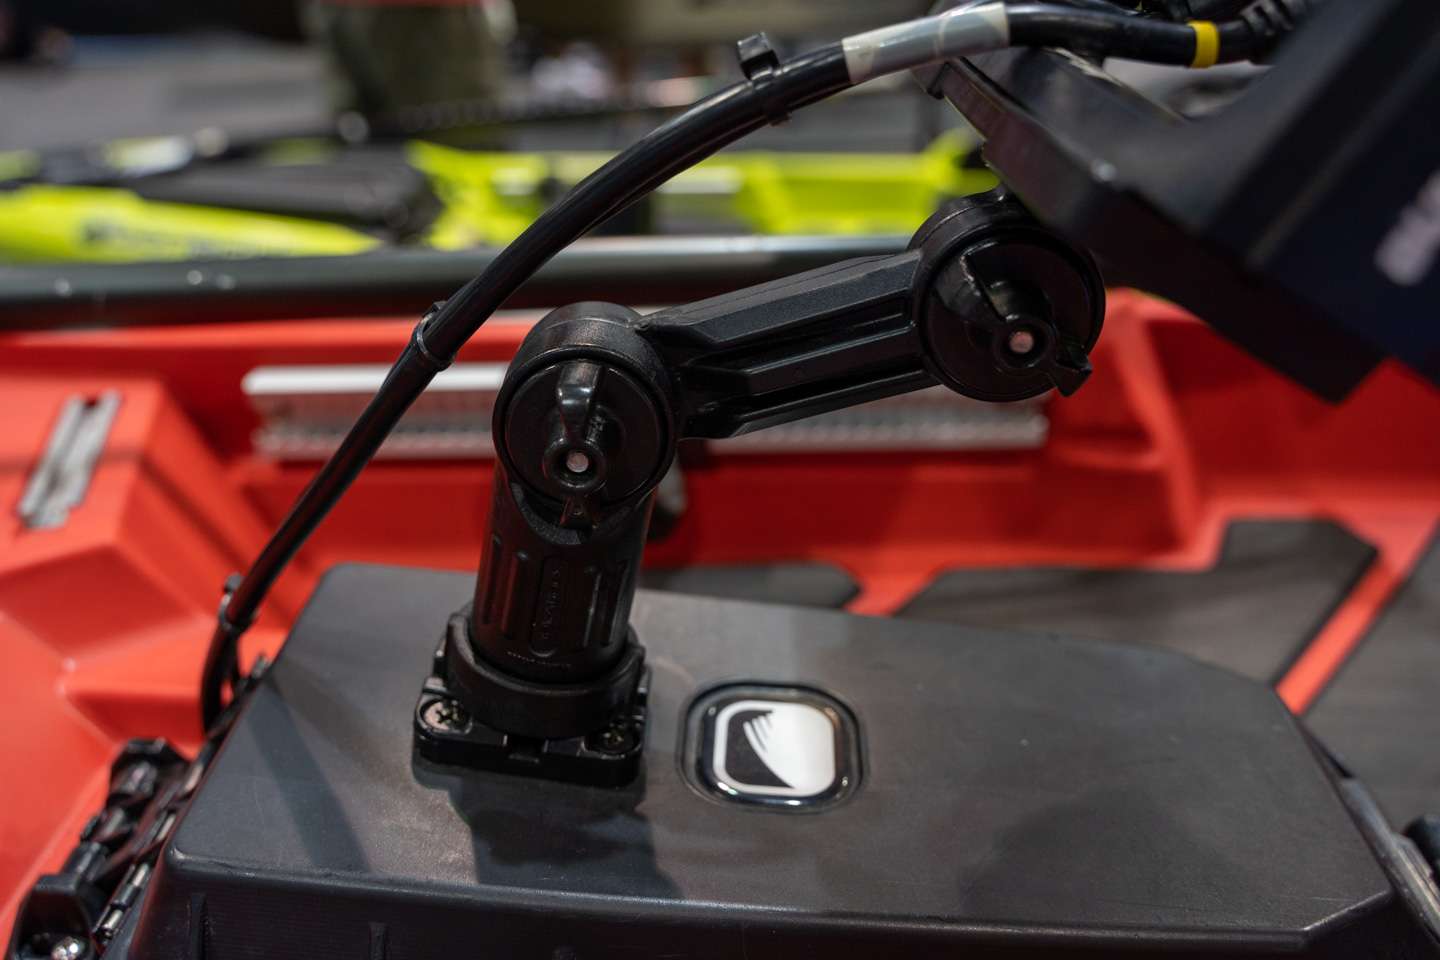 YakAttack accessories are shown on the Native kayaks. This accessory is an easily maneuverable electronics mount.  